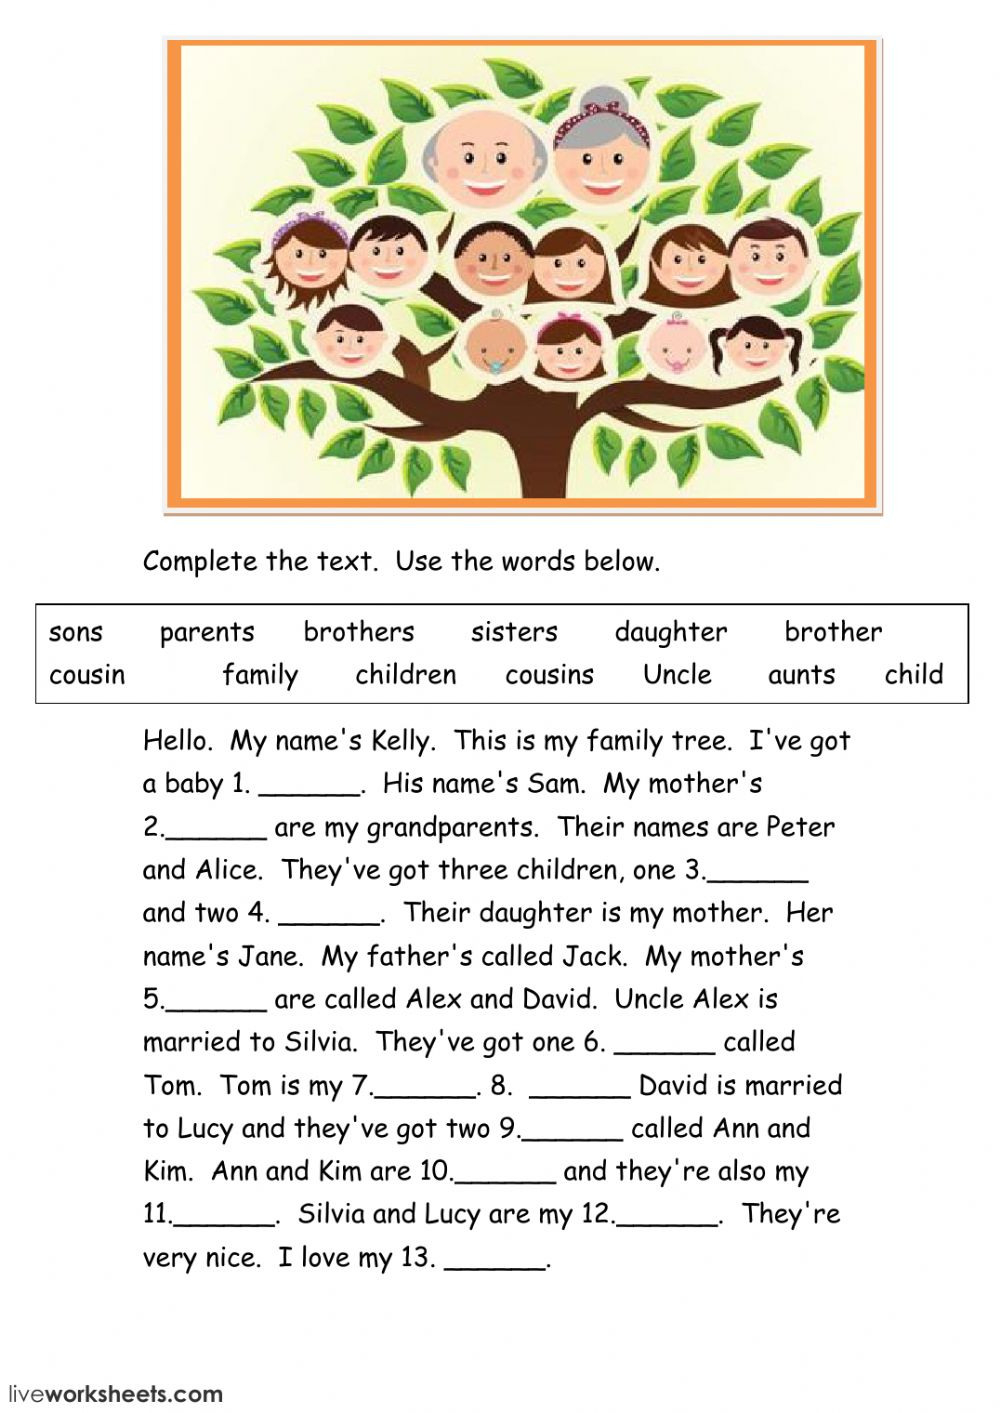 Spanish Family Tree Worksheet Answers — db-excel.com